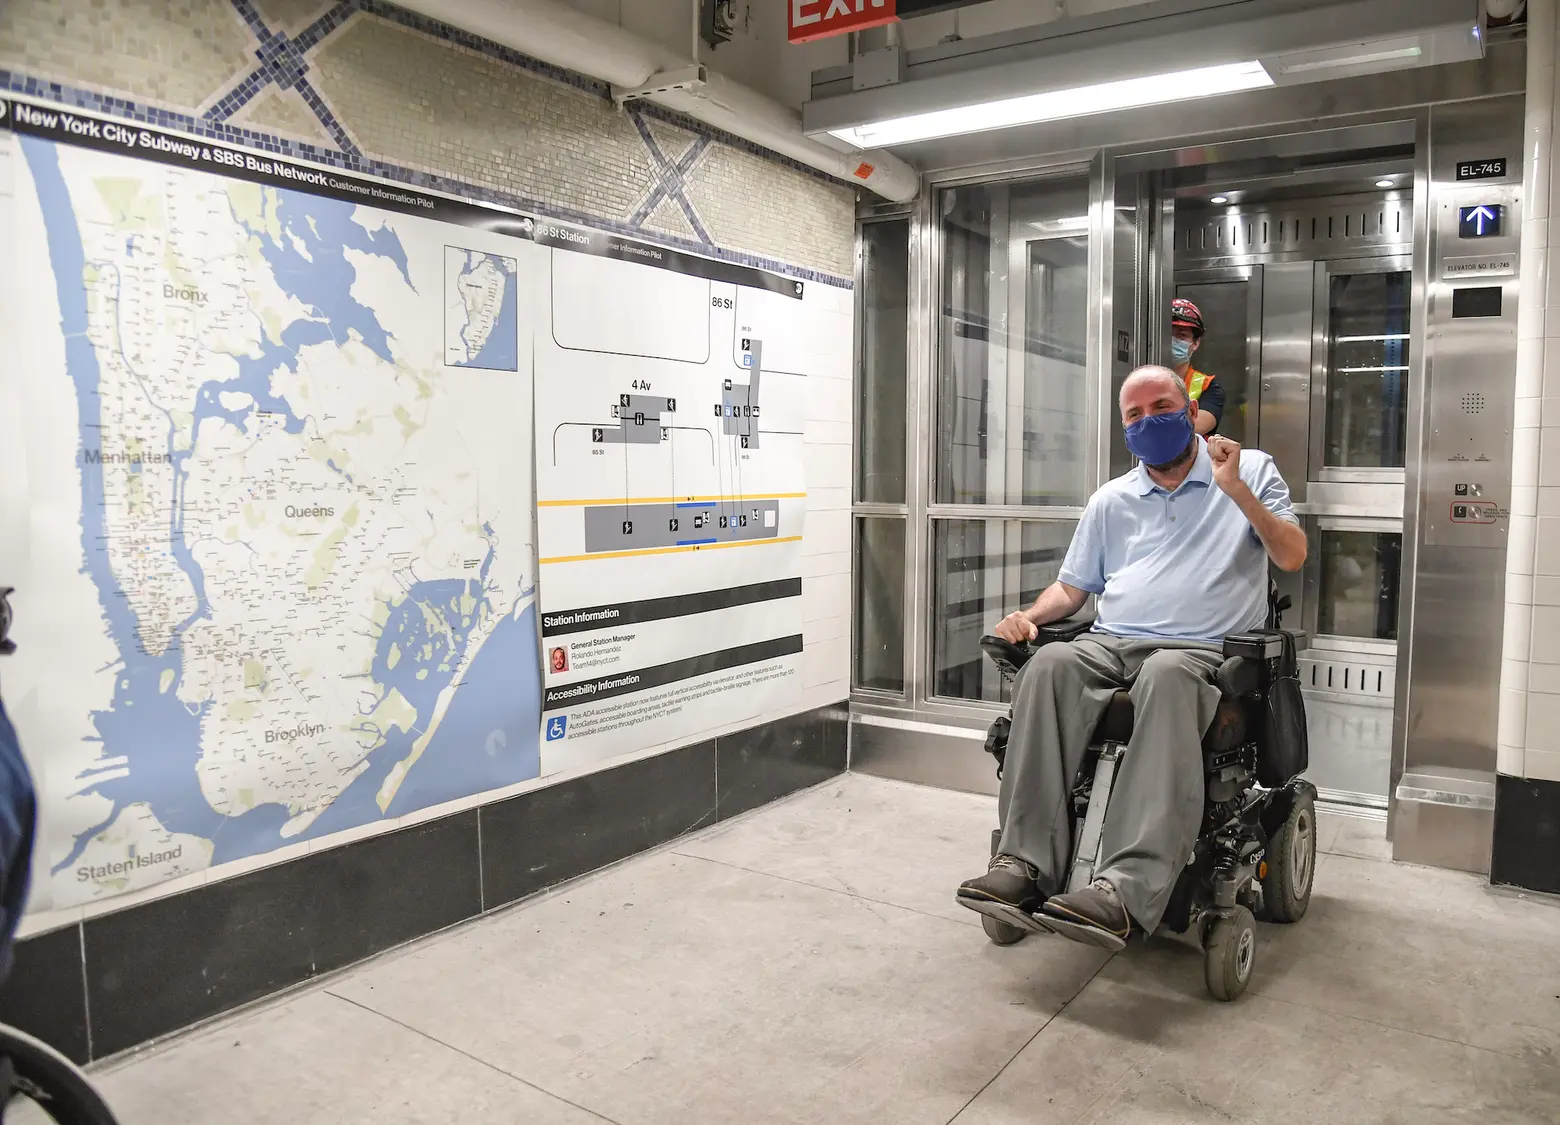 NYC transit system still widely inaccessible despite recent improvements